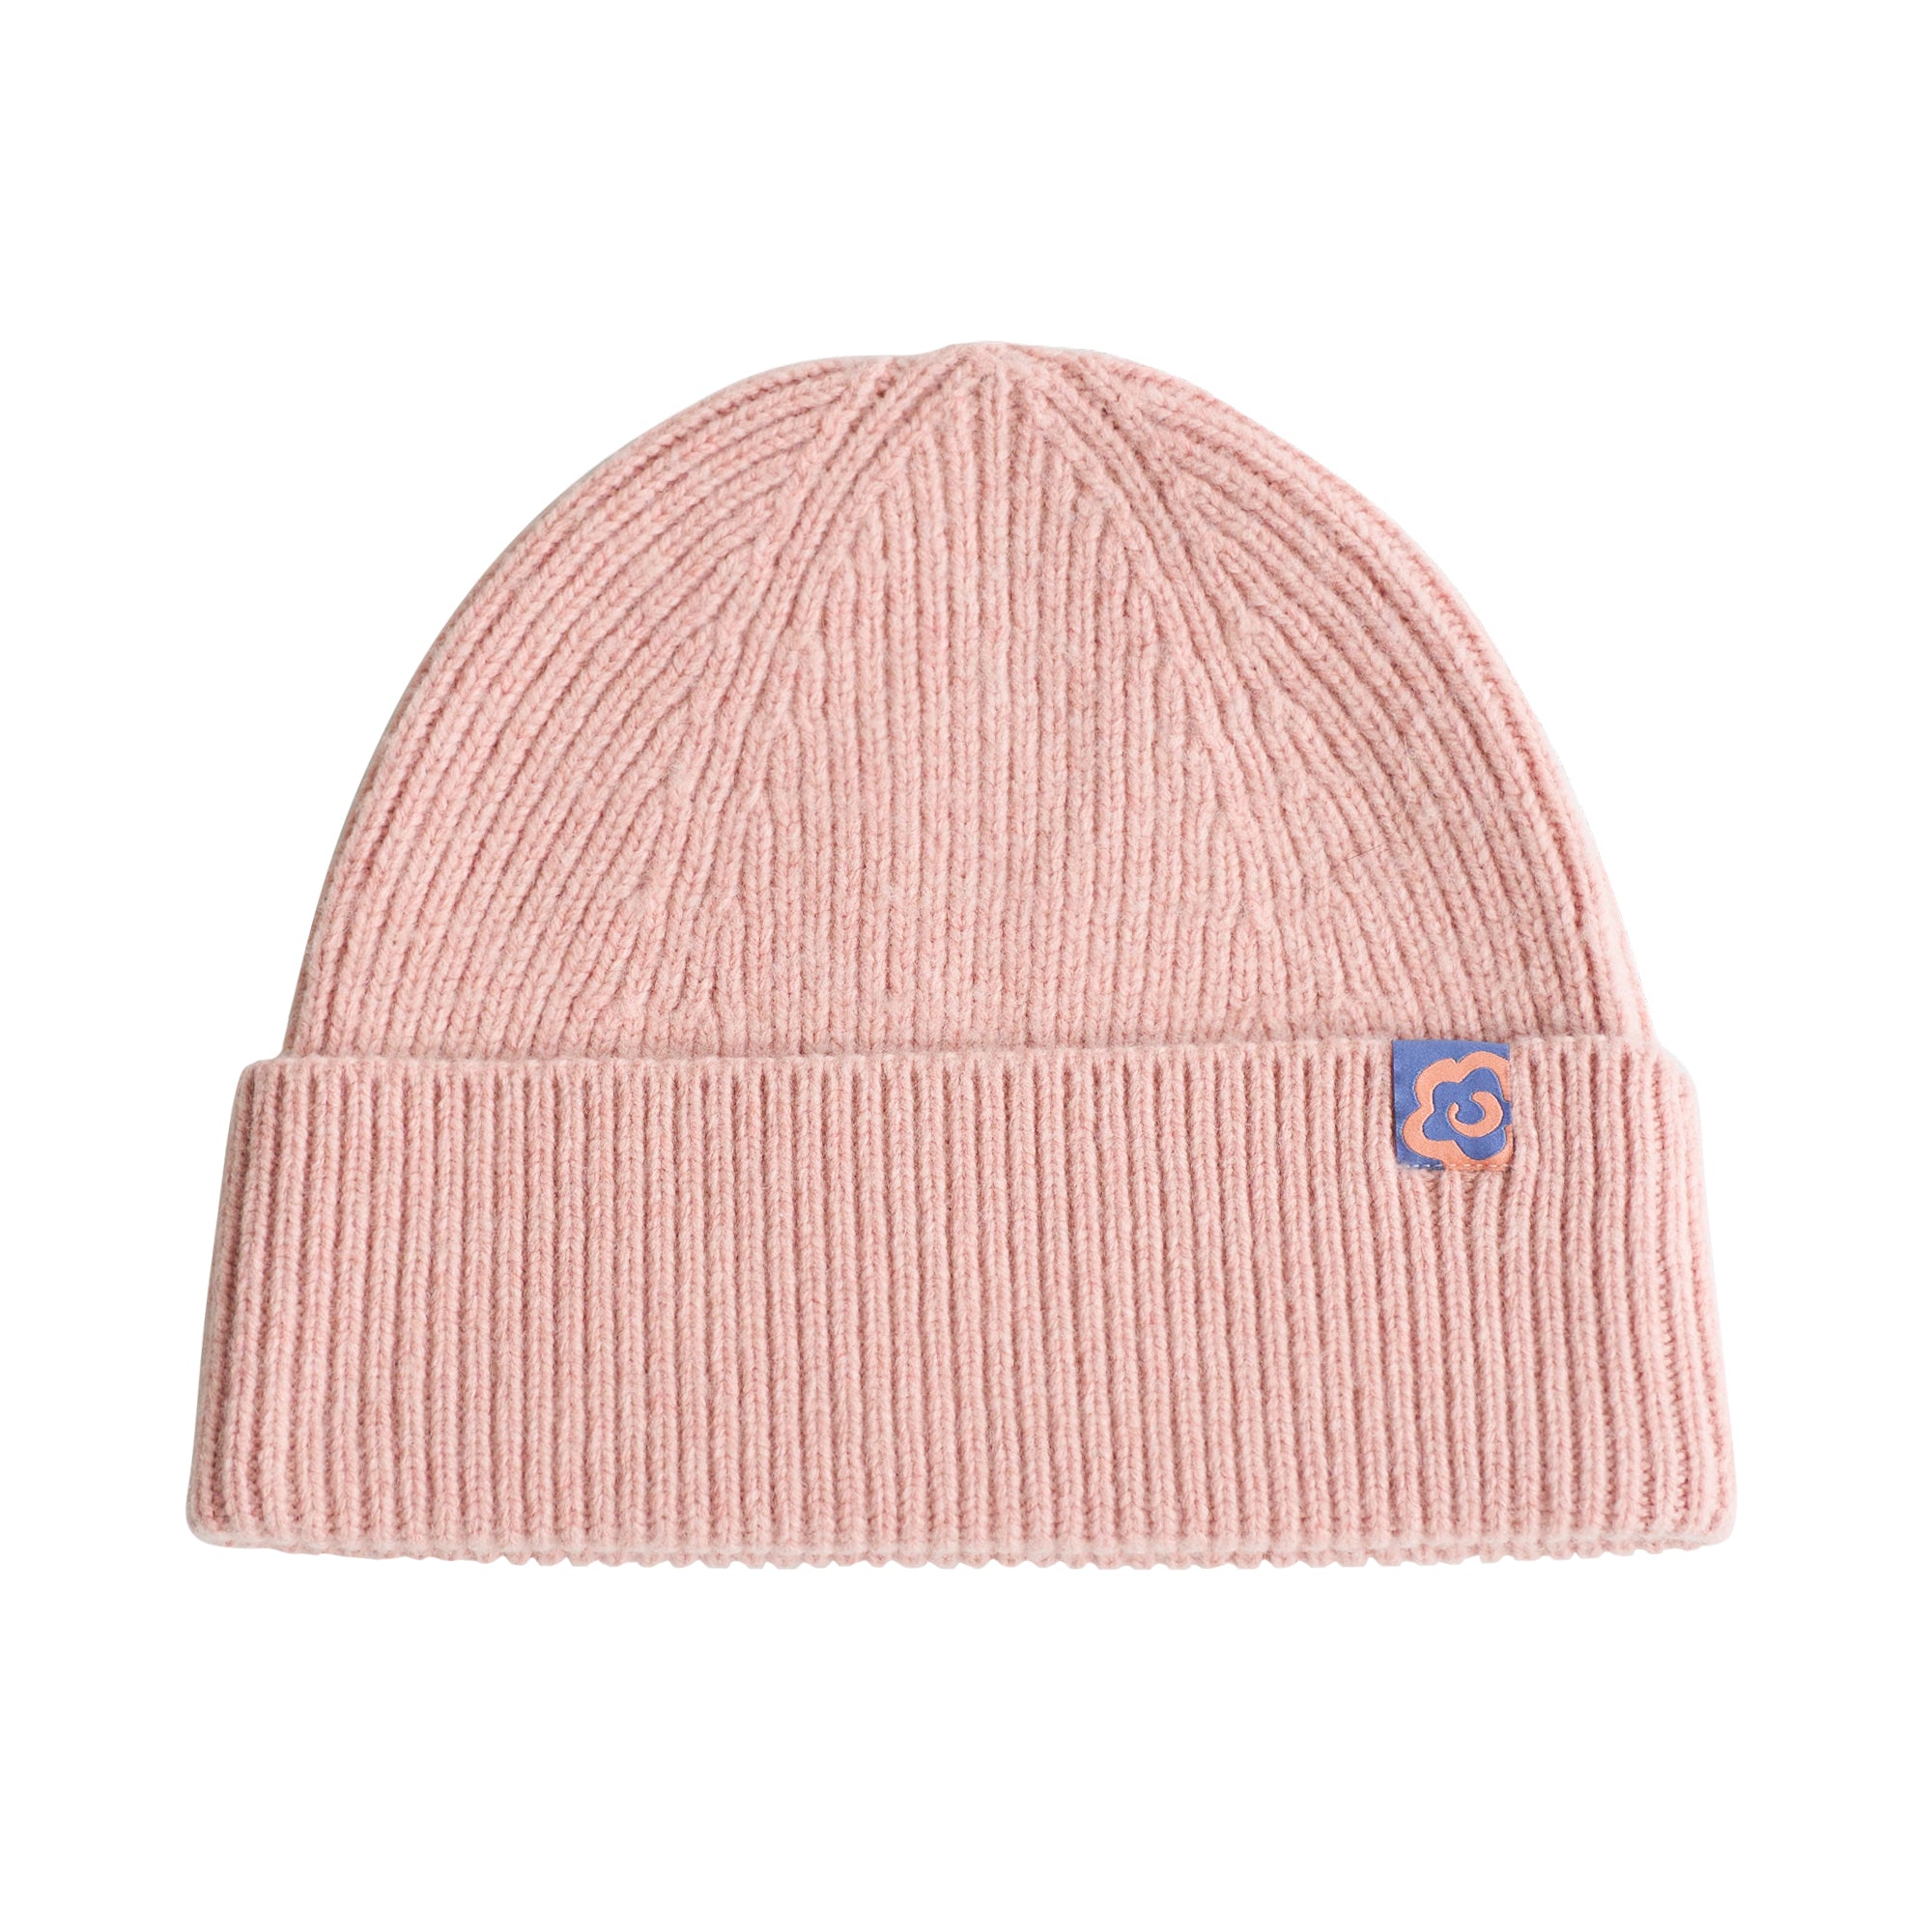 "Extra Fine Marino" Wool Knit Beanie Hat - Pale Pink product